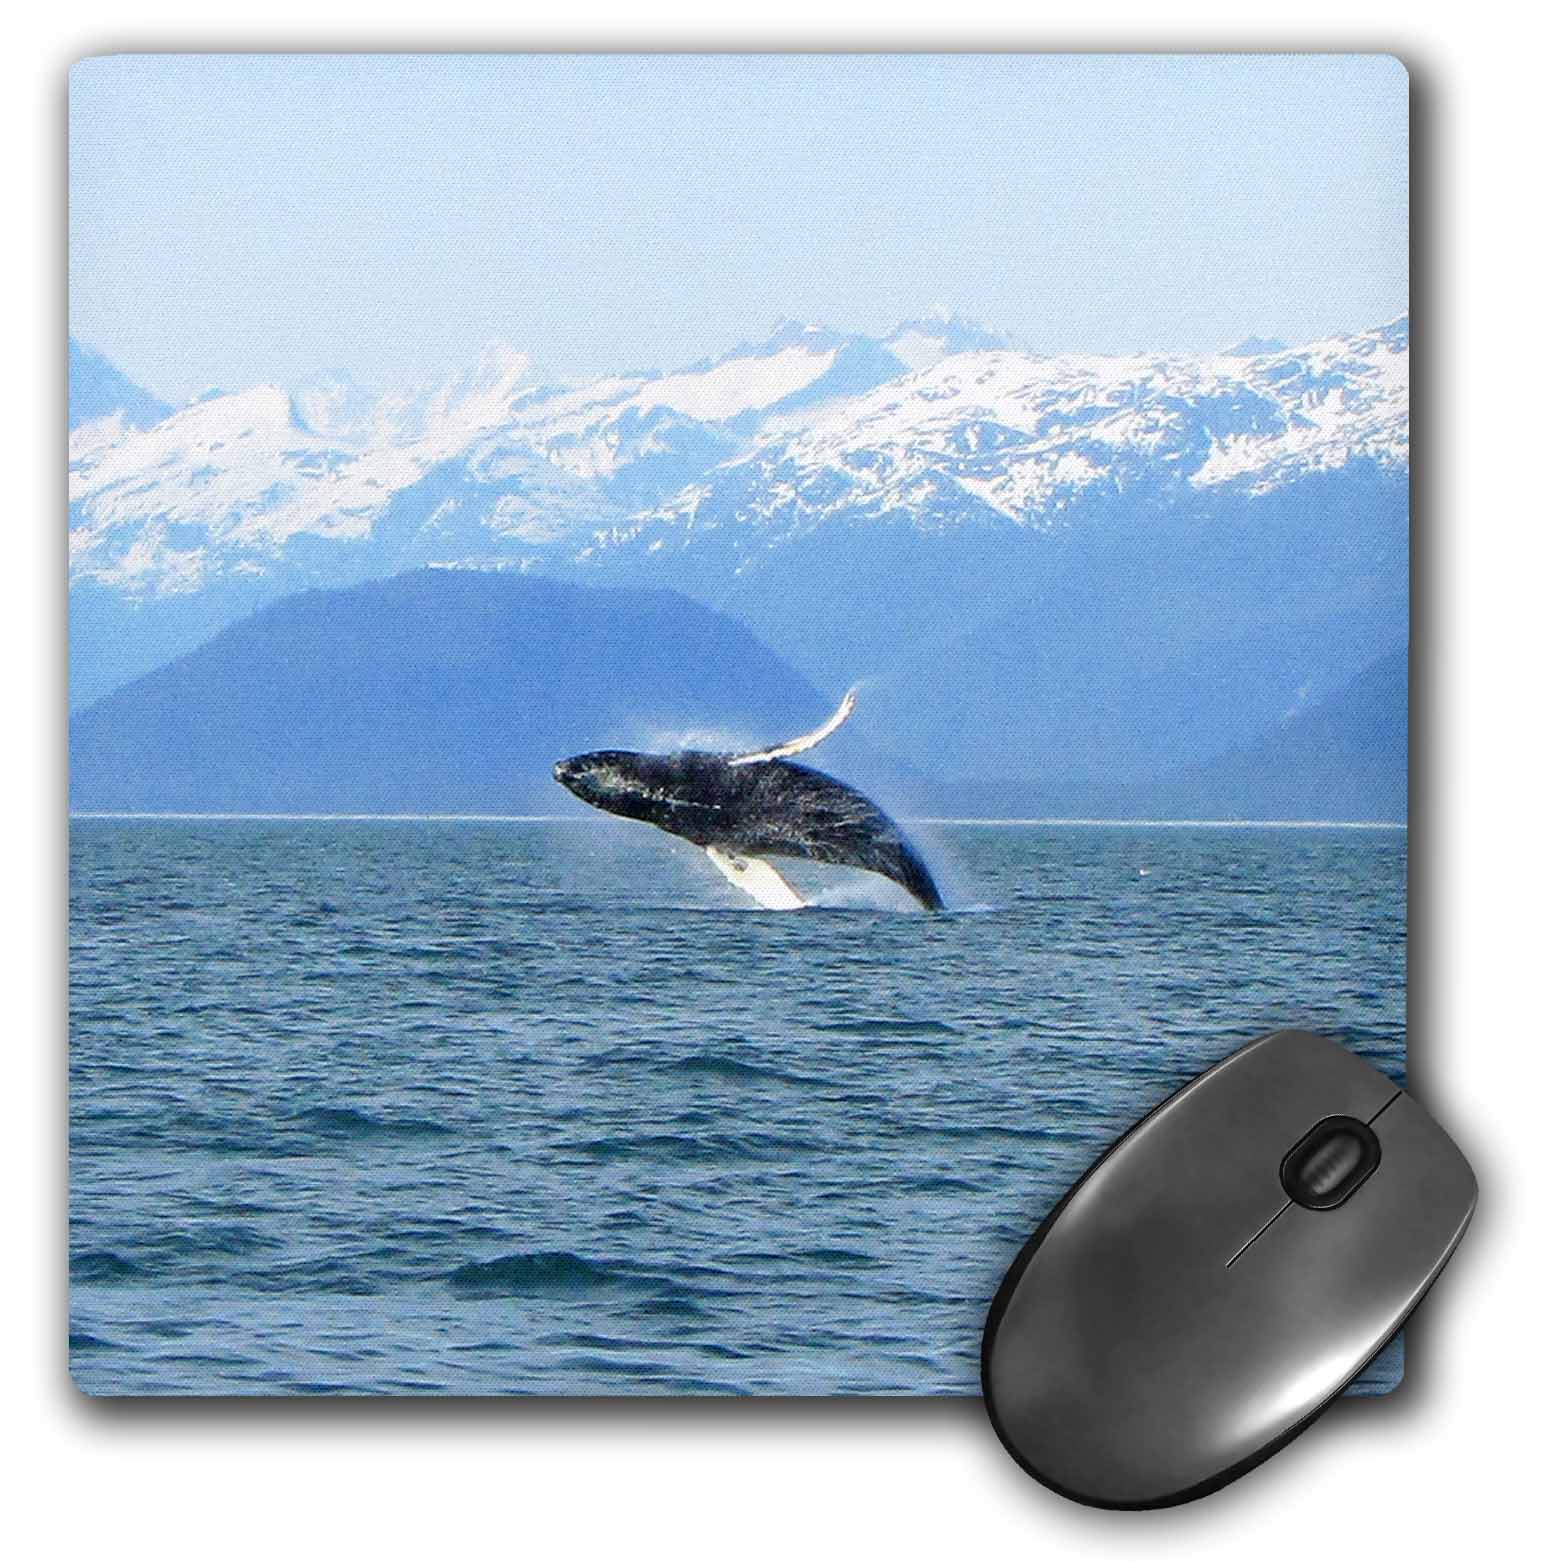 3dRose Humpback Whale Breaches in the Lynn Canal in Southeastern Alaska - Mouse Pad, 8 by 8-inch (mp_21598_1) - image 1 of 1